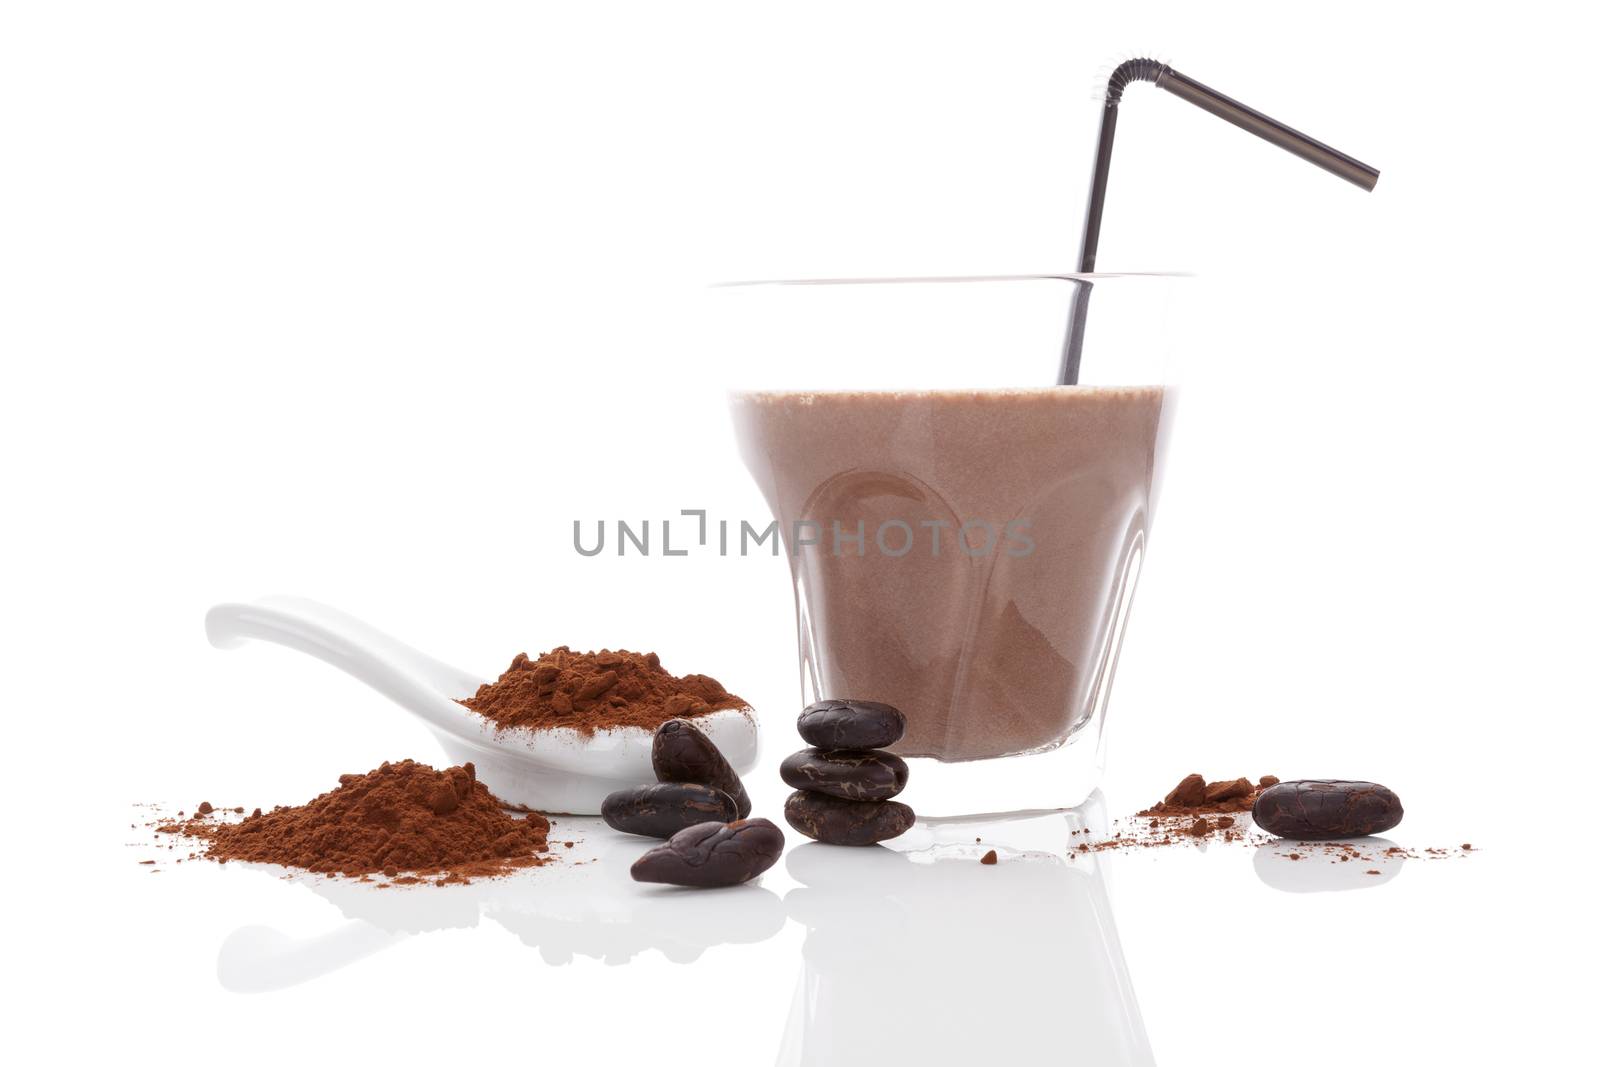 Cocoa drink, beans and powder isolated on white background. Culinary cocoa drinking